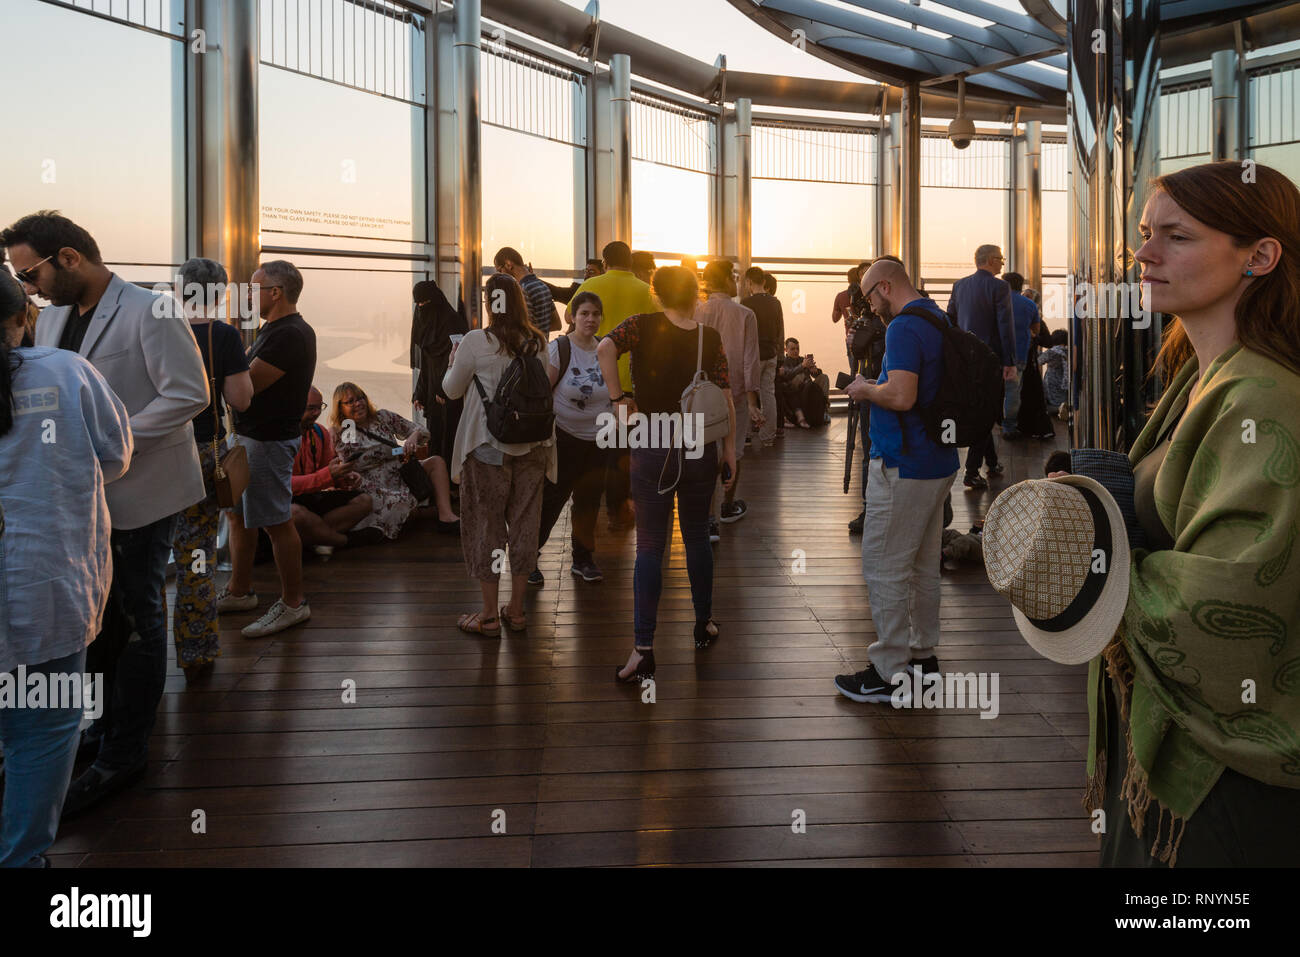 DUBAI, UAE - February 17, 2018: Tourists look at sunrise at the observation deck at the top of Burj Khalifa - highest building in the world, United Ar Stock Photo